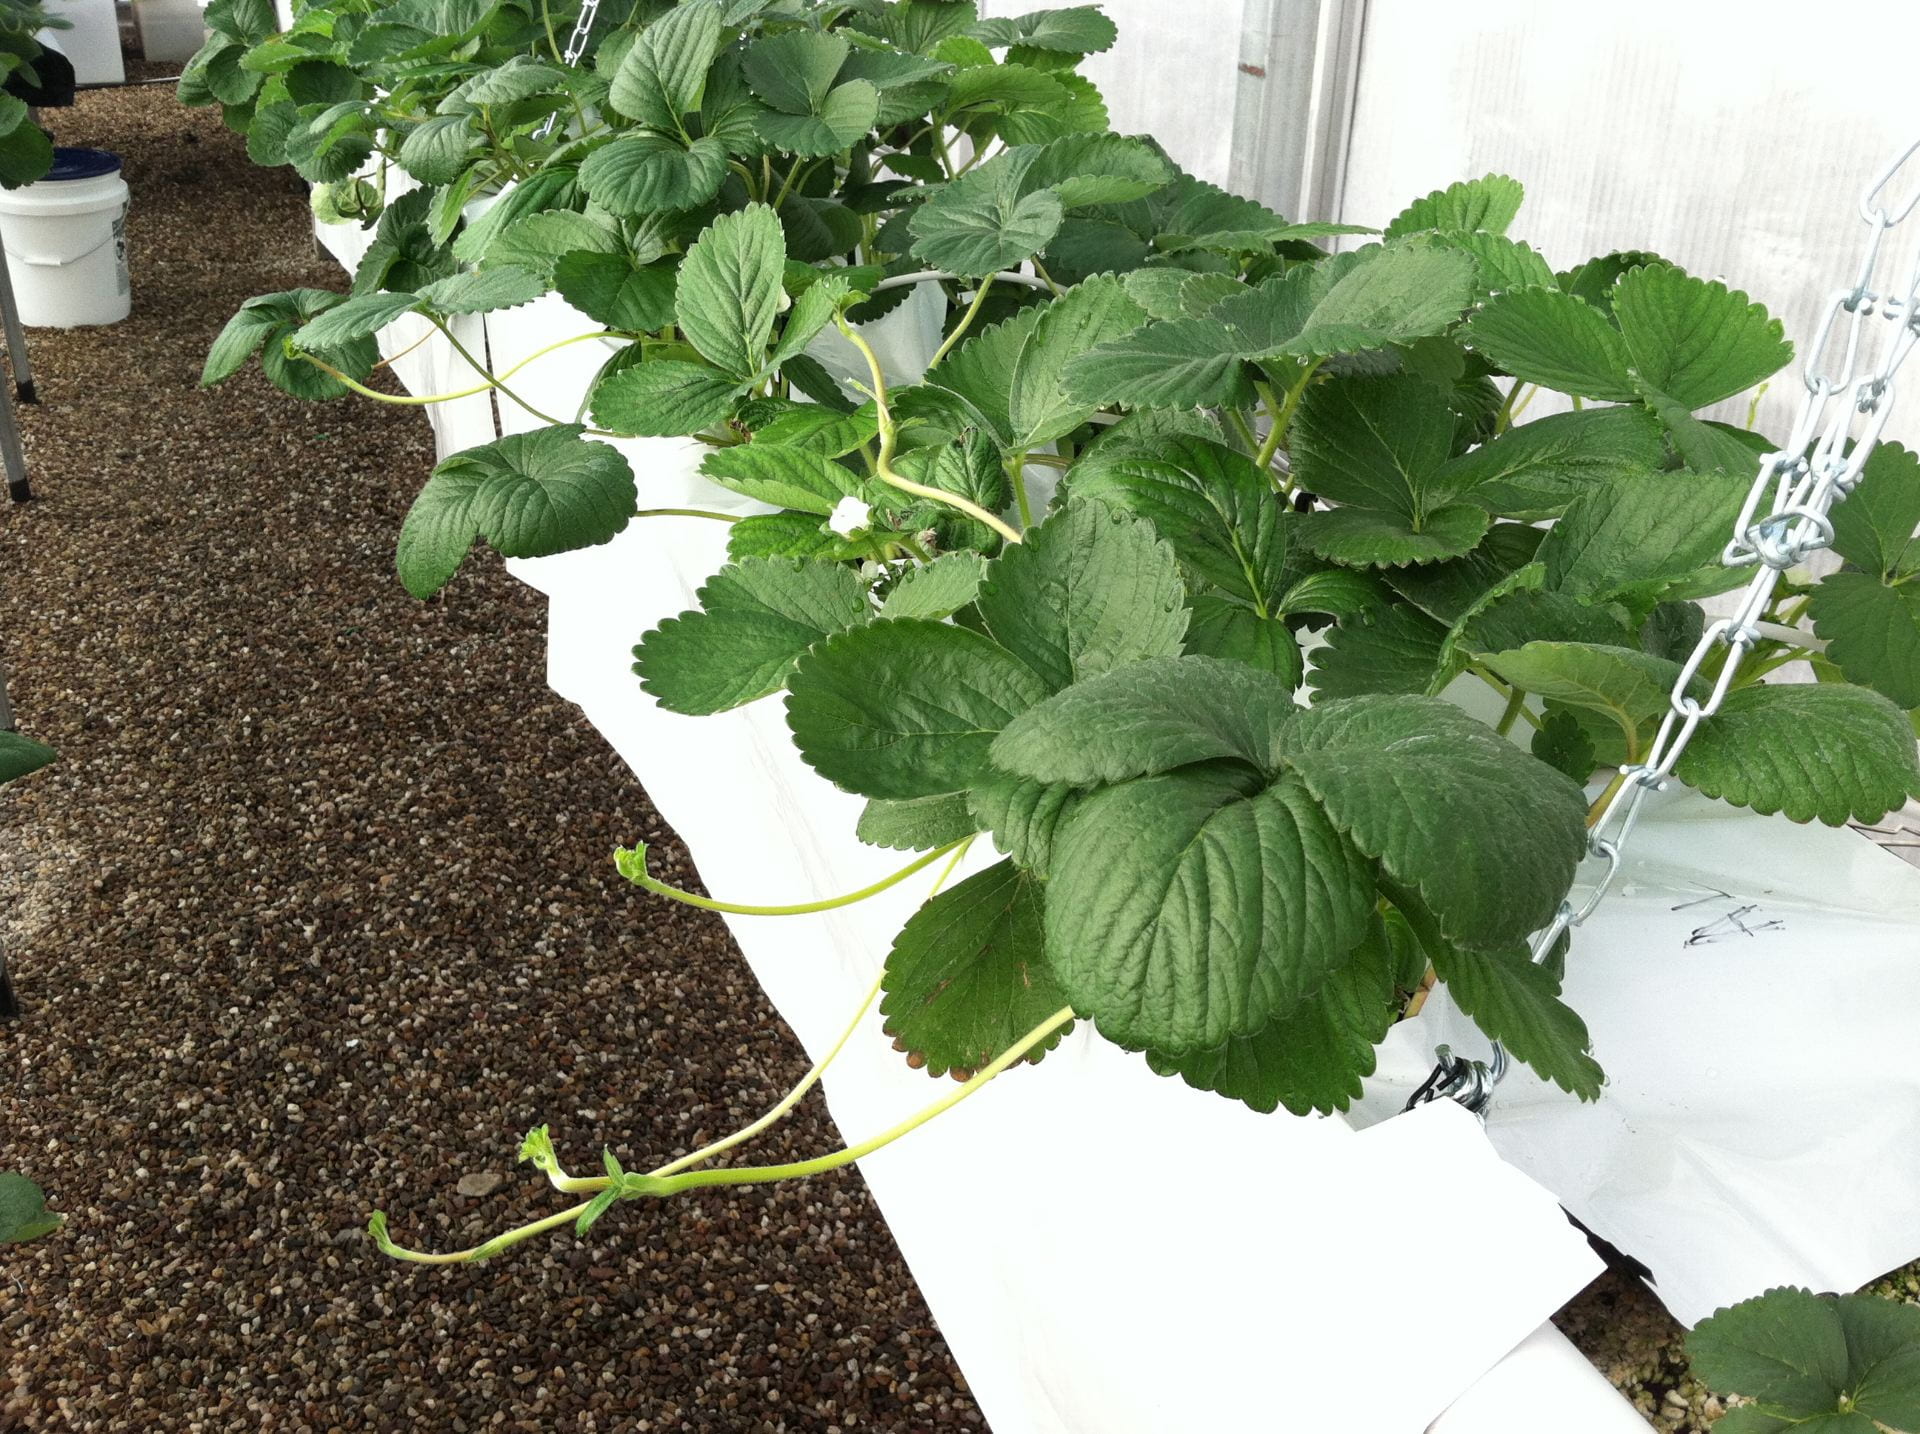 Strawberry plants extending runners to be removed.